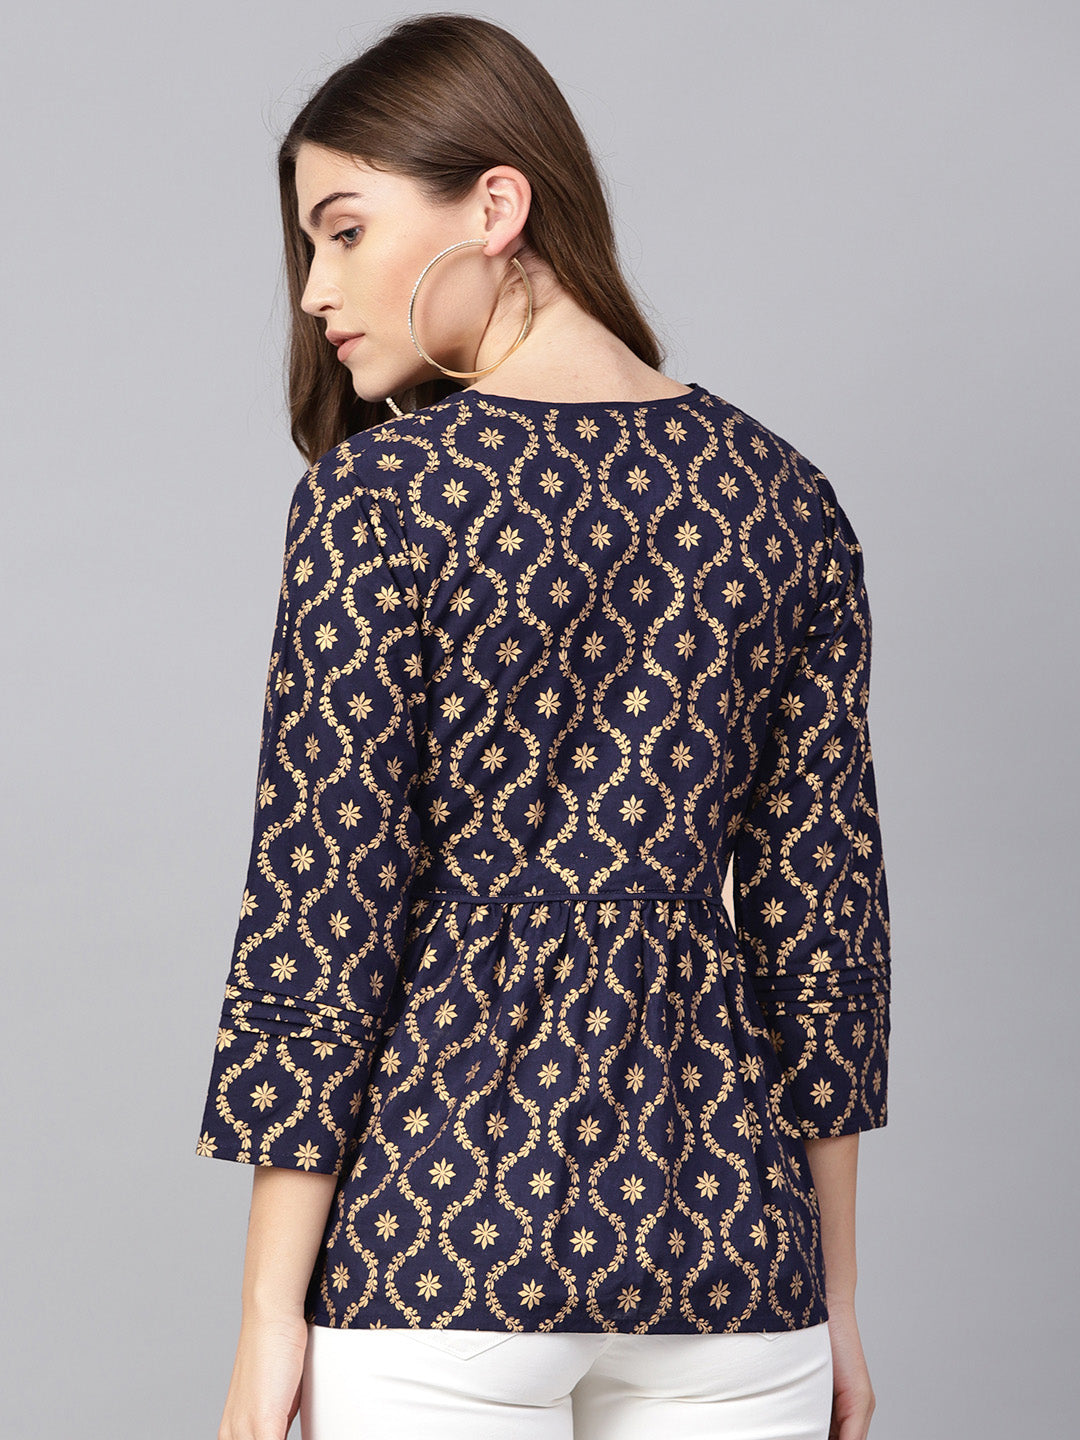 Bhama Couture Navy Blue Golden Printed Top